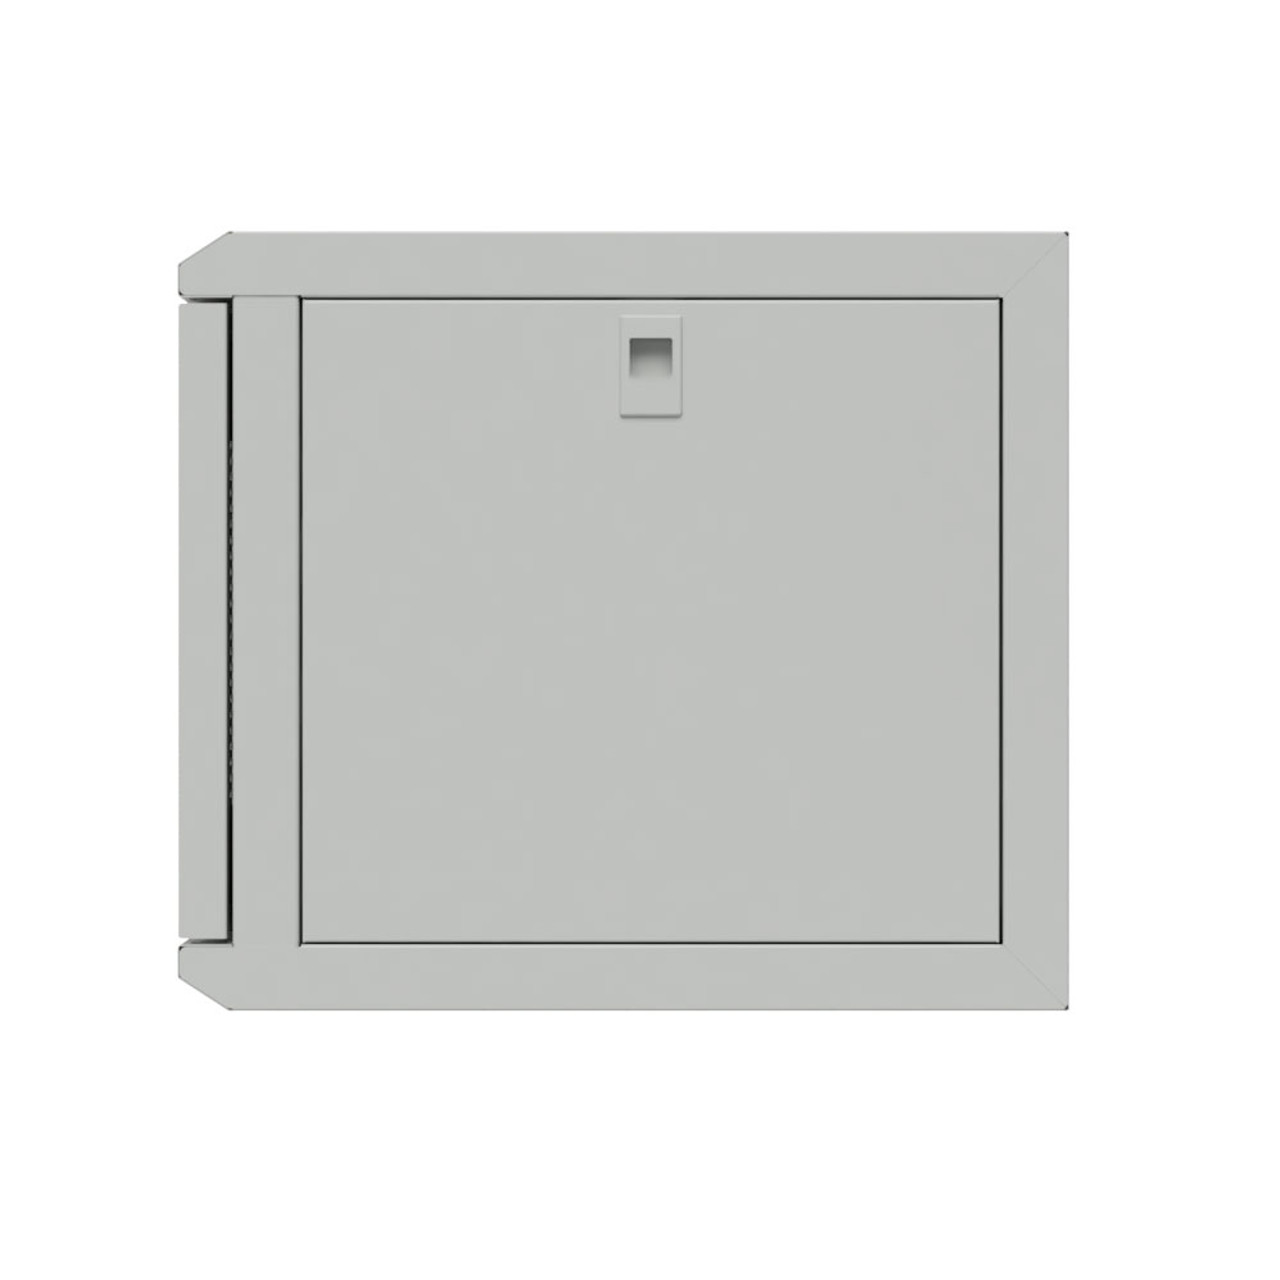 15.75 in Wall Mount Network Cabinet, 6U, Perforated, Gray